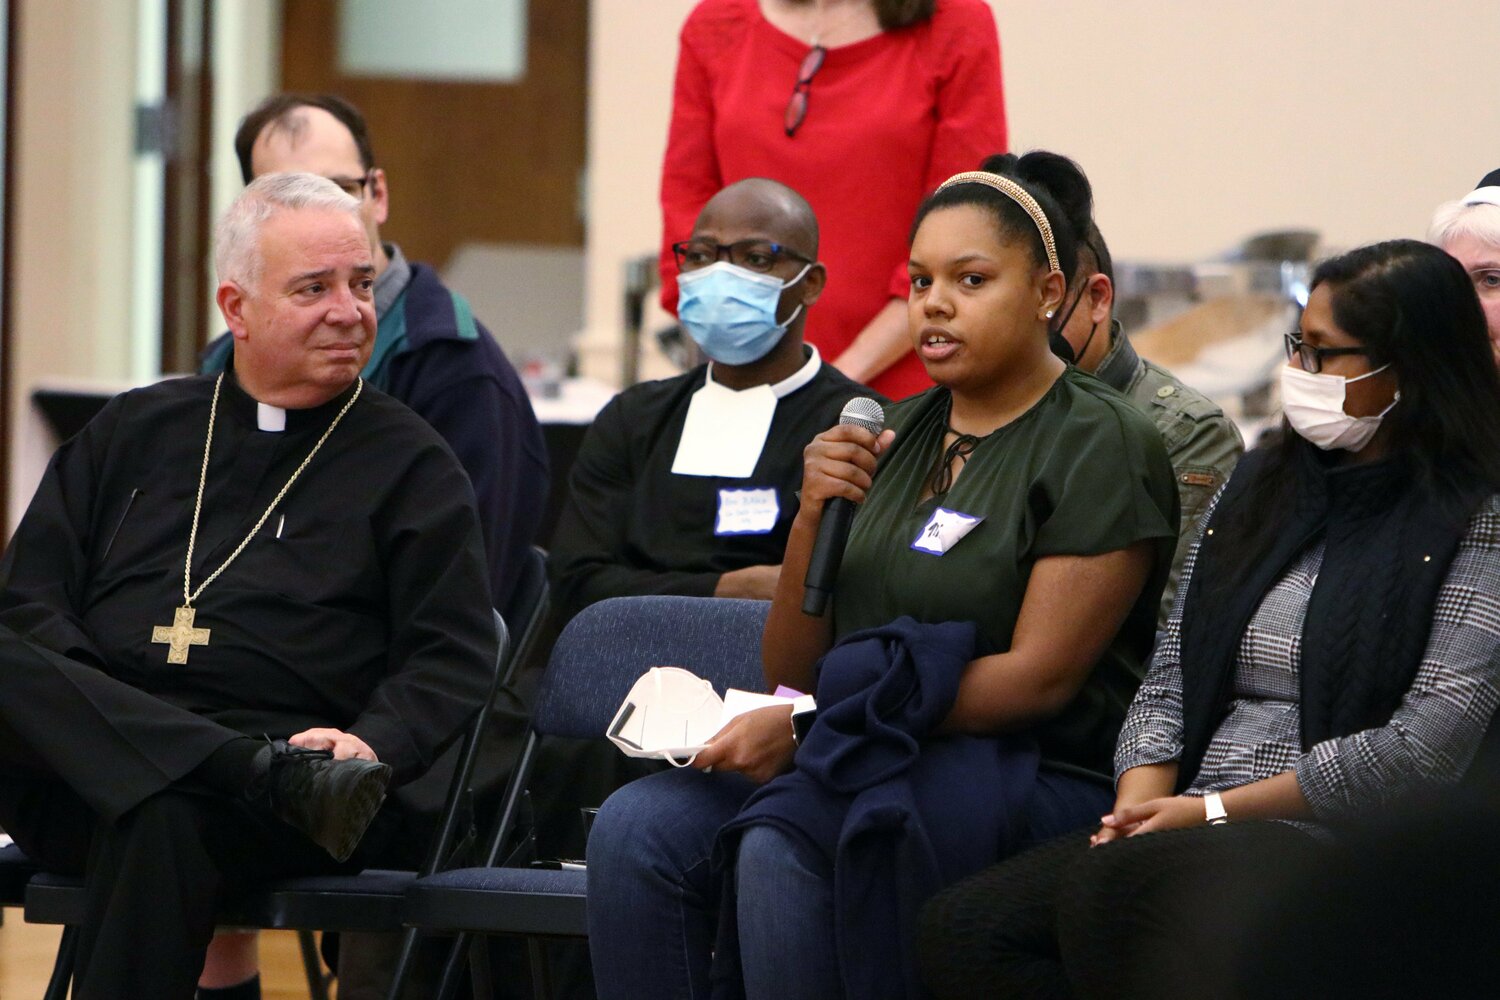 Philadelphia Archbishop Nelson J. Pérez joins college students, other young adults and ministry leaders during a synodal listening session at La Salle University April 4, 2022.